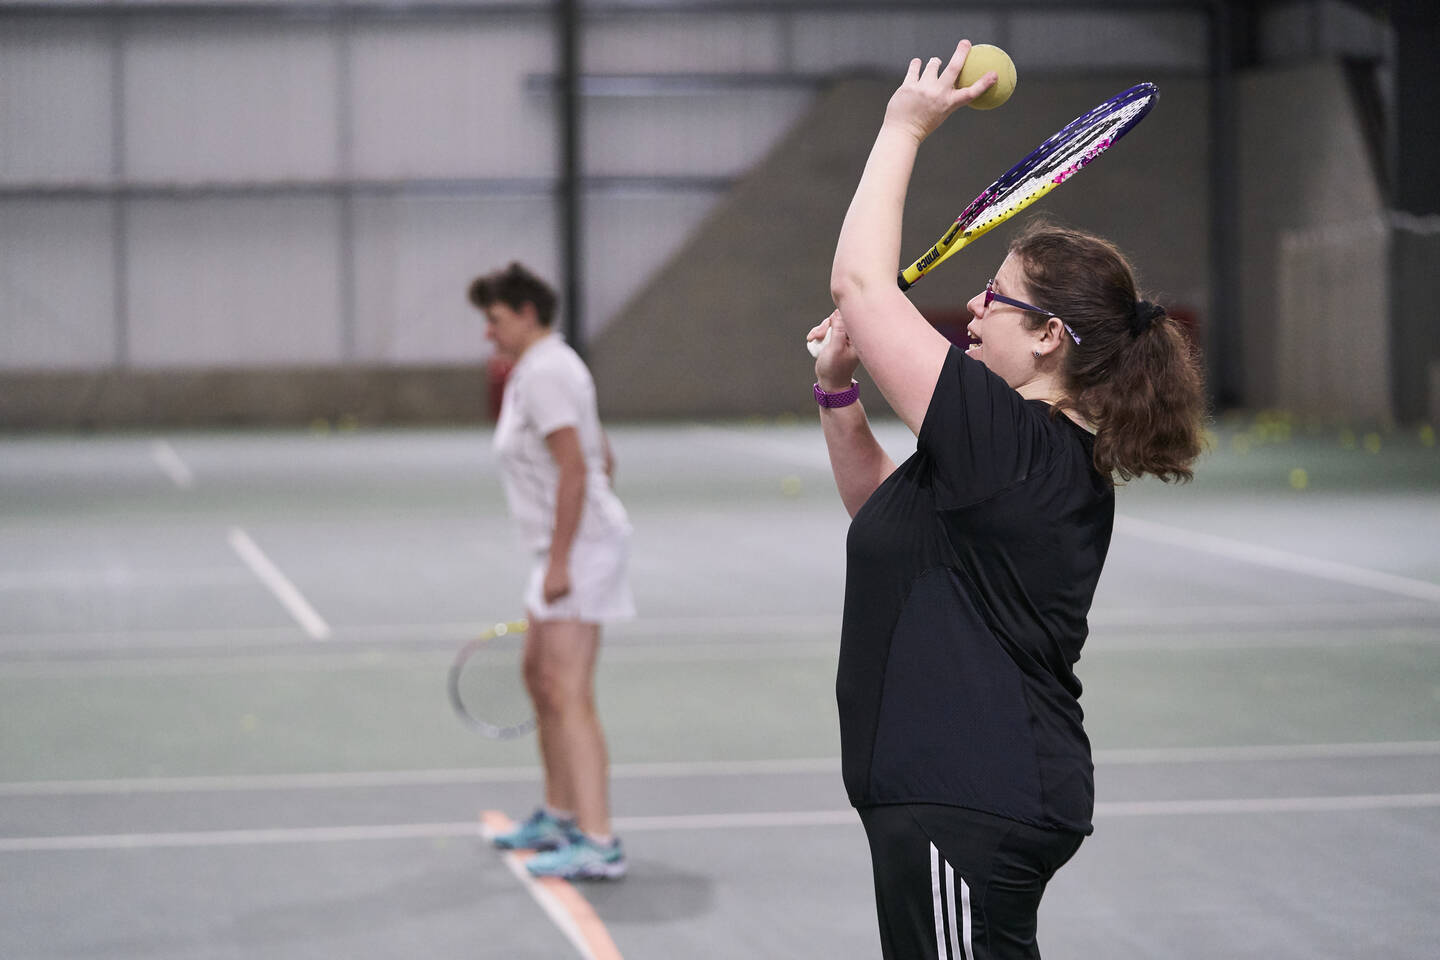 Two visually impaired women playing tennis together